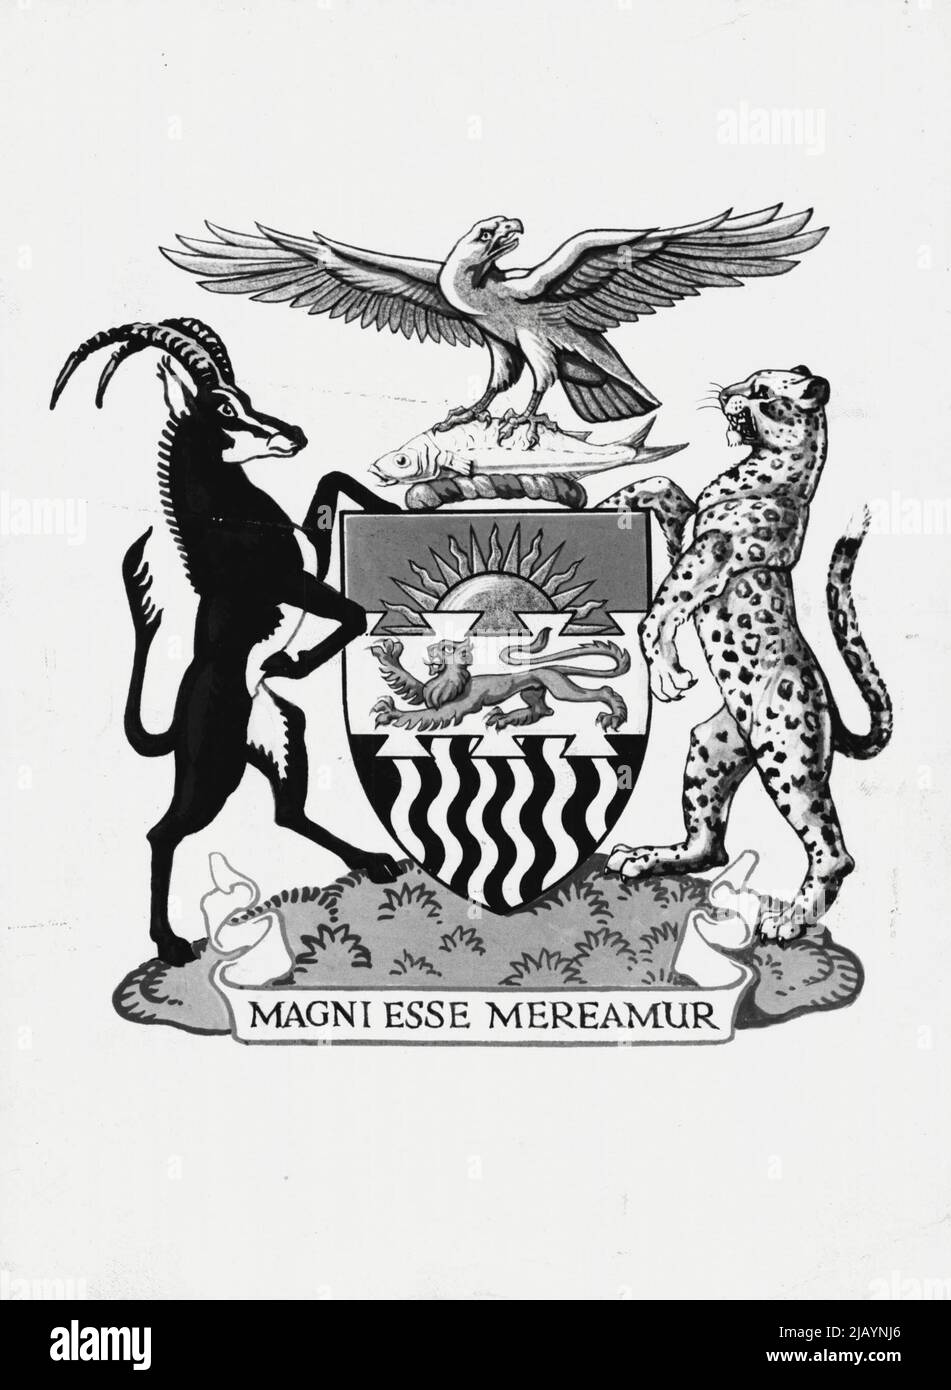 The Arms Of The Federation of Rhodesia & Nyasaland Description: For Arms: Per fesse Azure and Sable in chief a Sun rising Or and in base six Palets wavy Argent over all a Fesse devetailed counter-dovetailed of the last thereon a Lion passant Gules. And for the Crest: On a Wreath of the Colours, An Eagle regaudant wings extended Or perched upon and grasping in the talons a Fish Argent. And for the Supporters: On the dexter side a Sable Antelope and on the sinister side a Leopard both proper: together with this Motto: Magni Esse Mereamur. July 22, 1954. Stock Photo